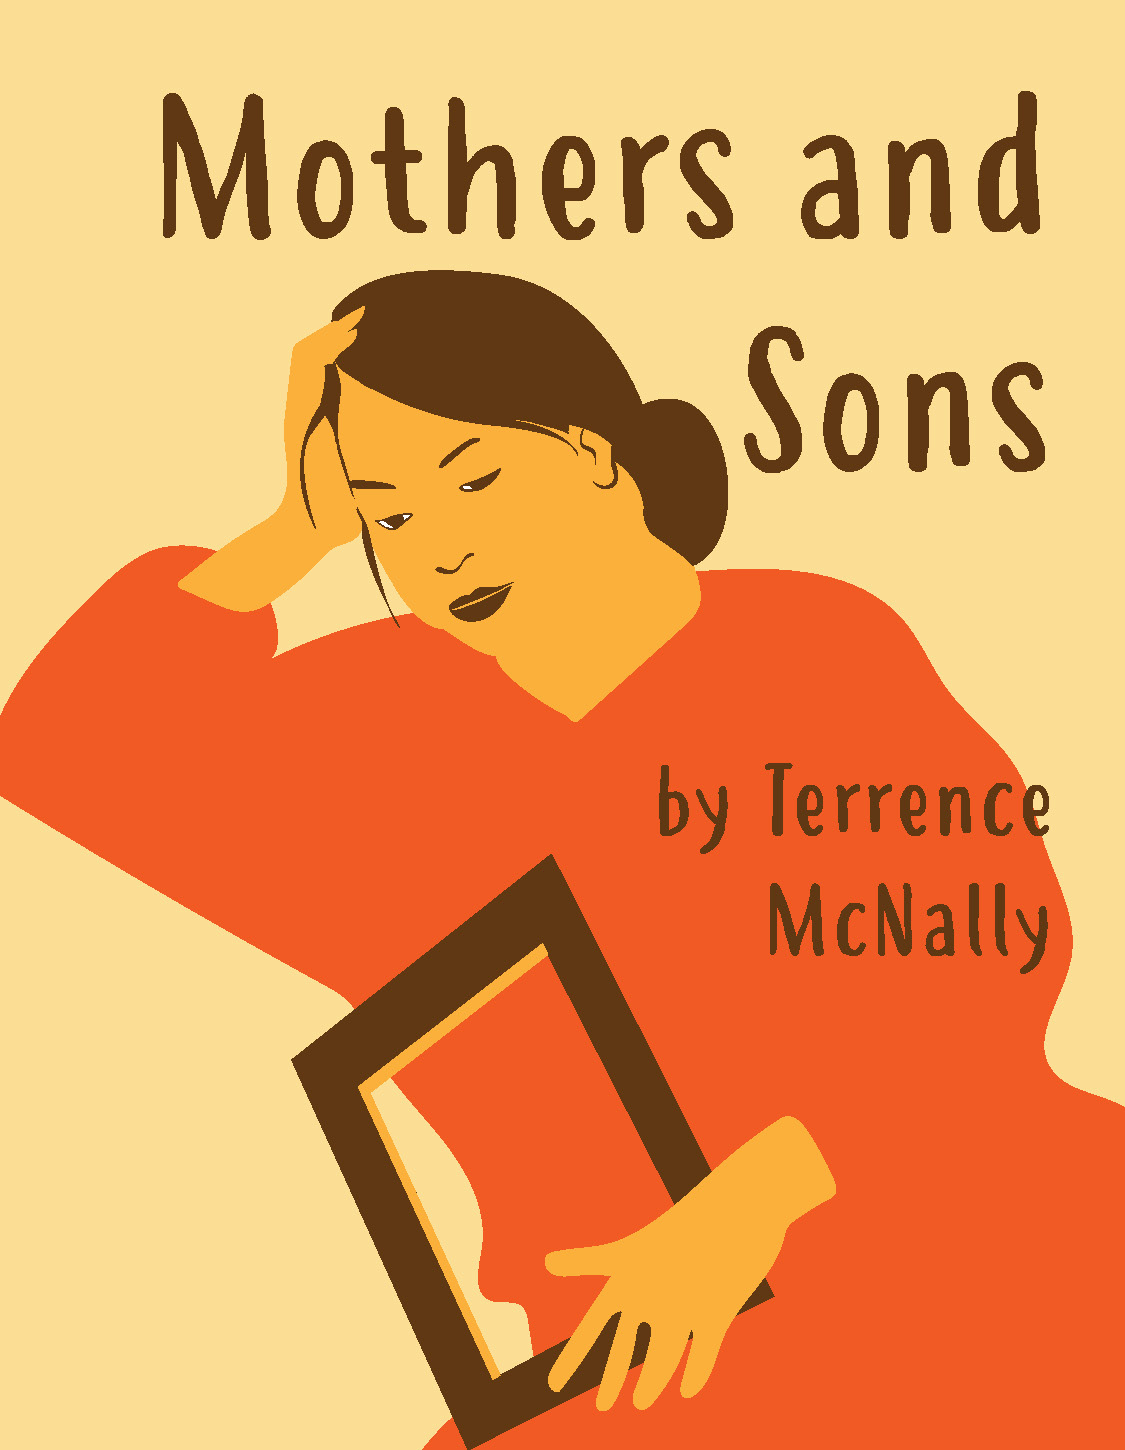 Auditions for Mothers and Sons by Terrence McNally